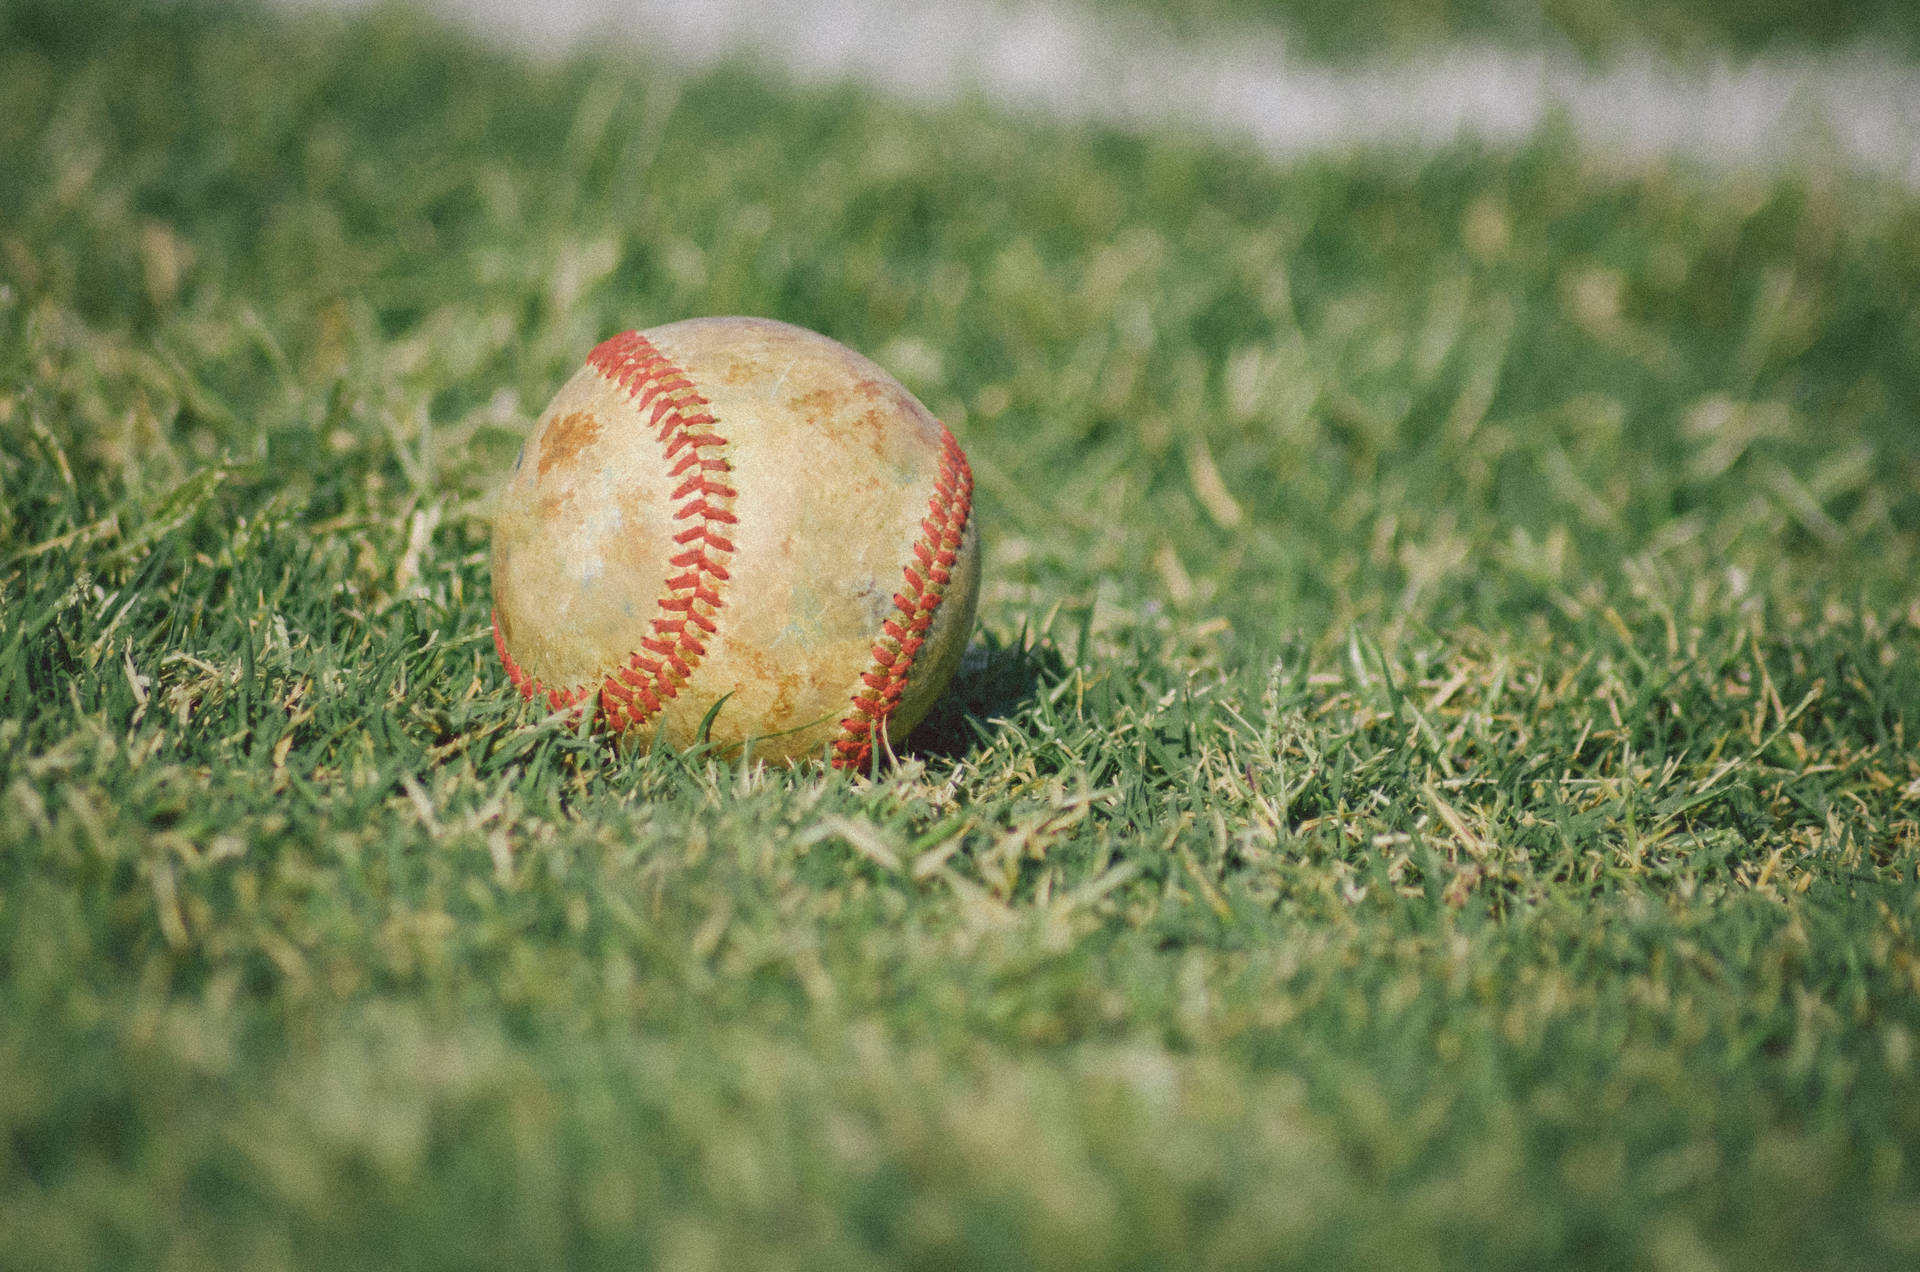 Baseball 4928X3264 Wallpaper and Background Image